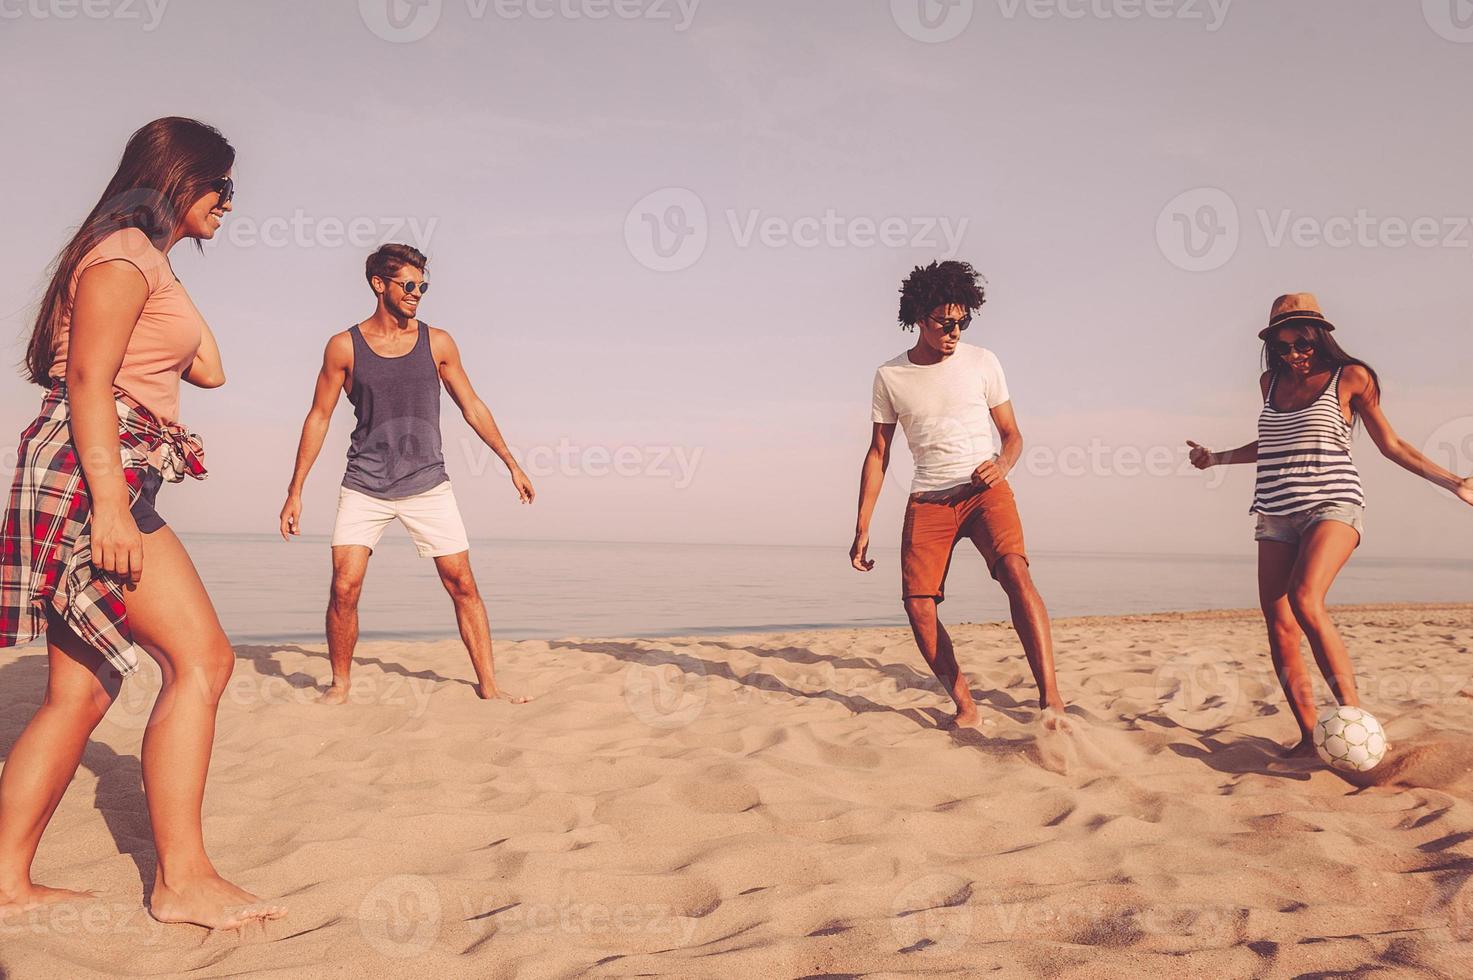 Enjoying time with friends. Group of cheerful young people playing with soccer ball on the beach with sea in the background photo